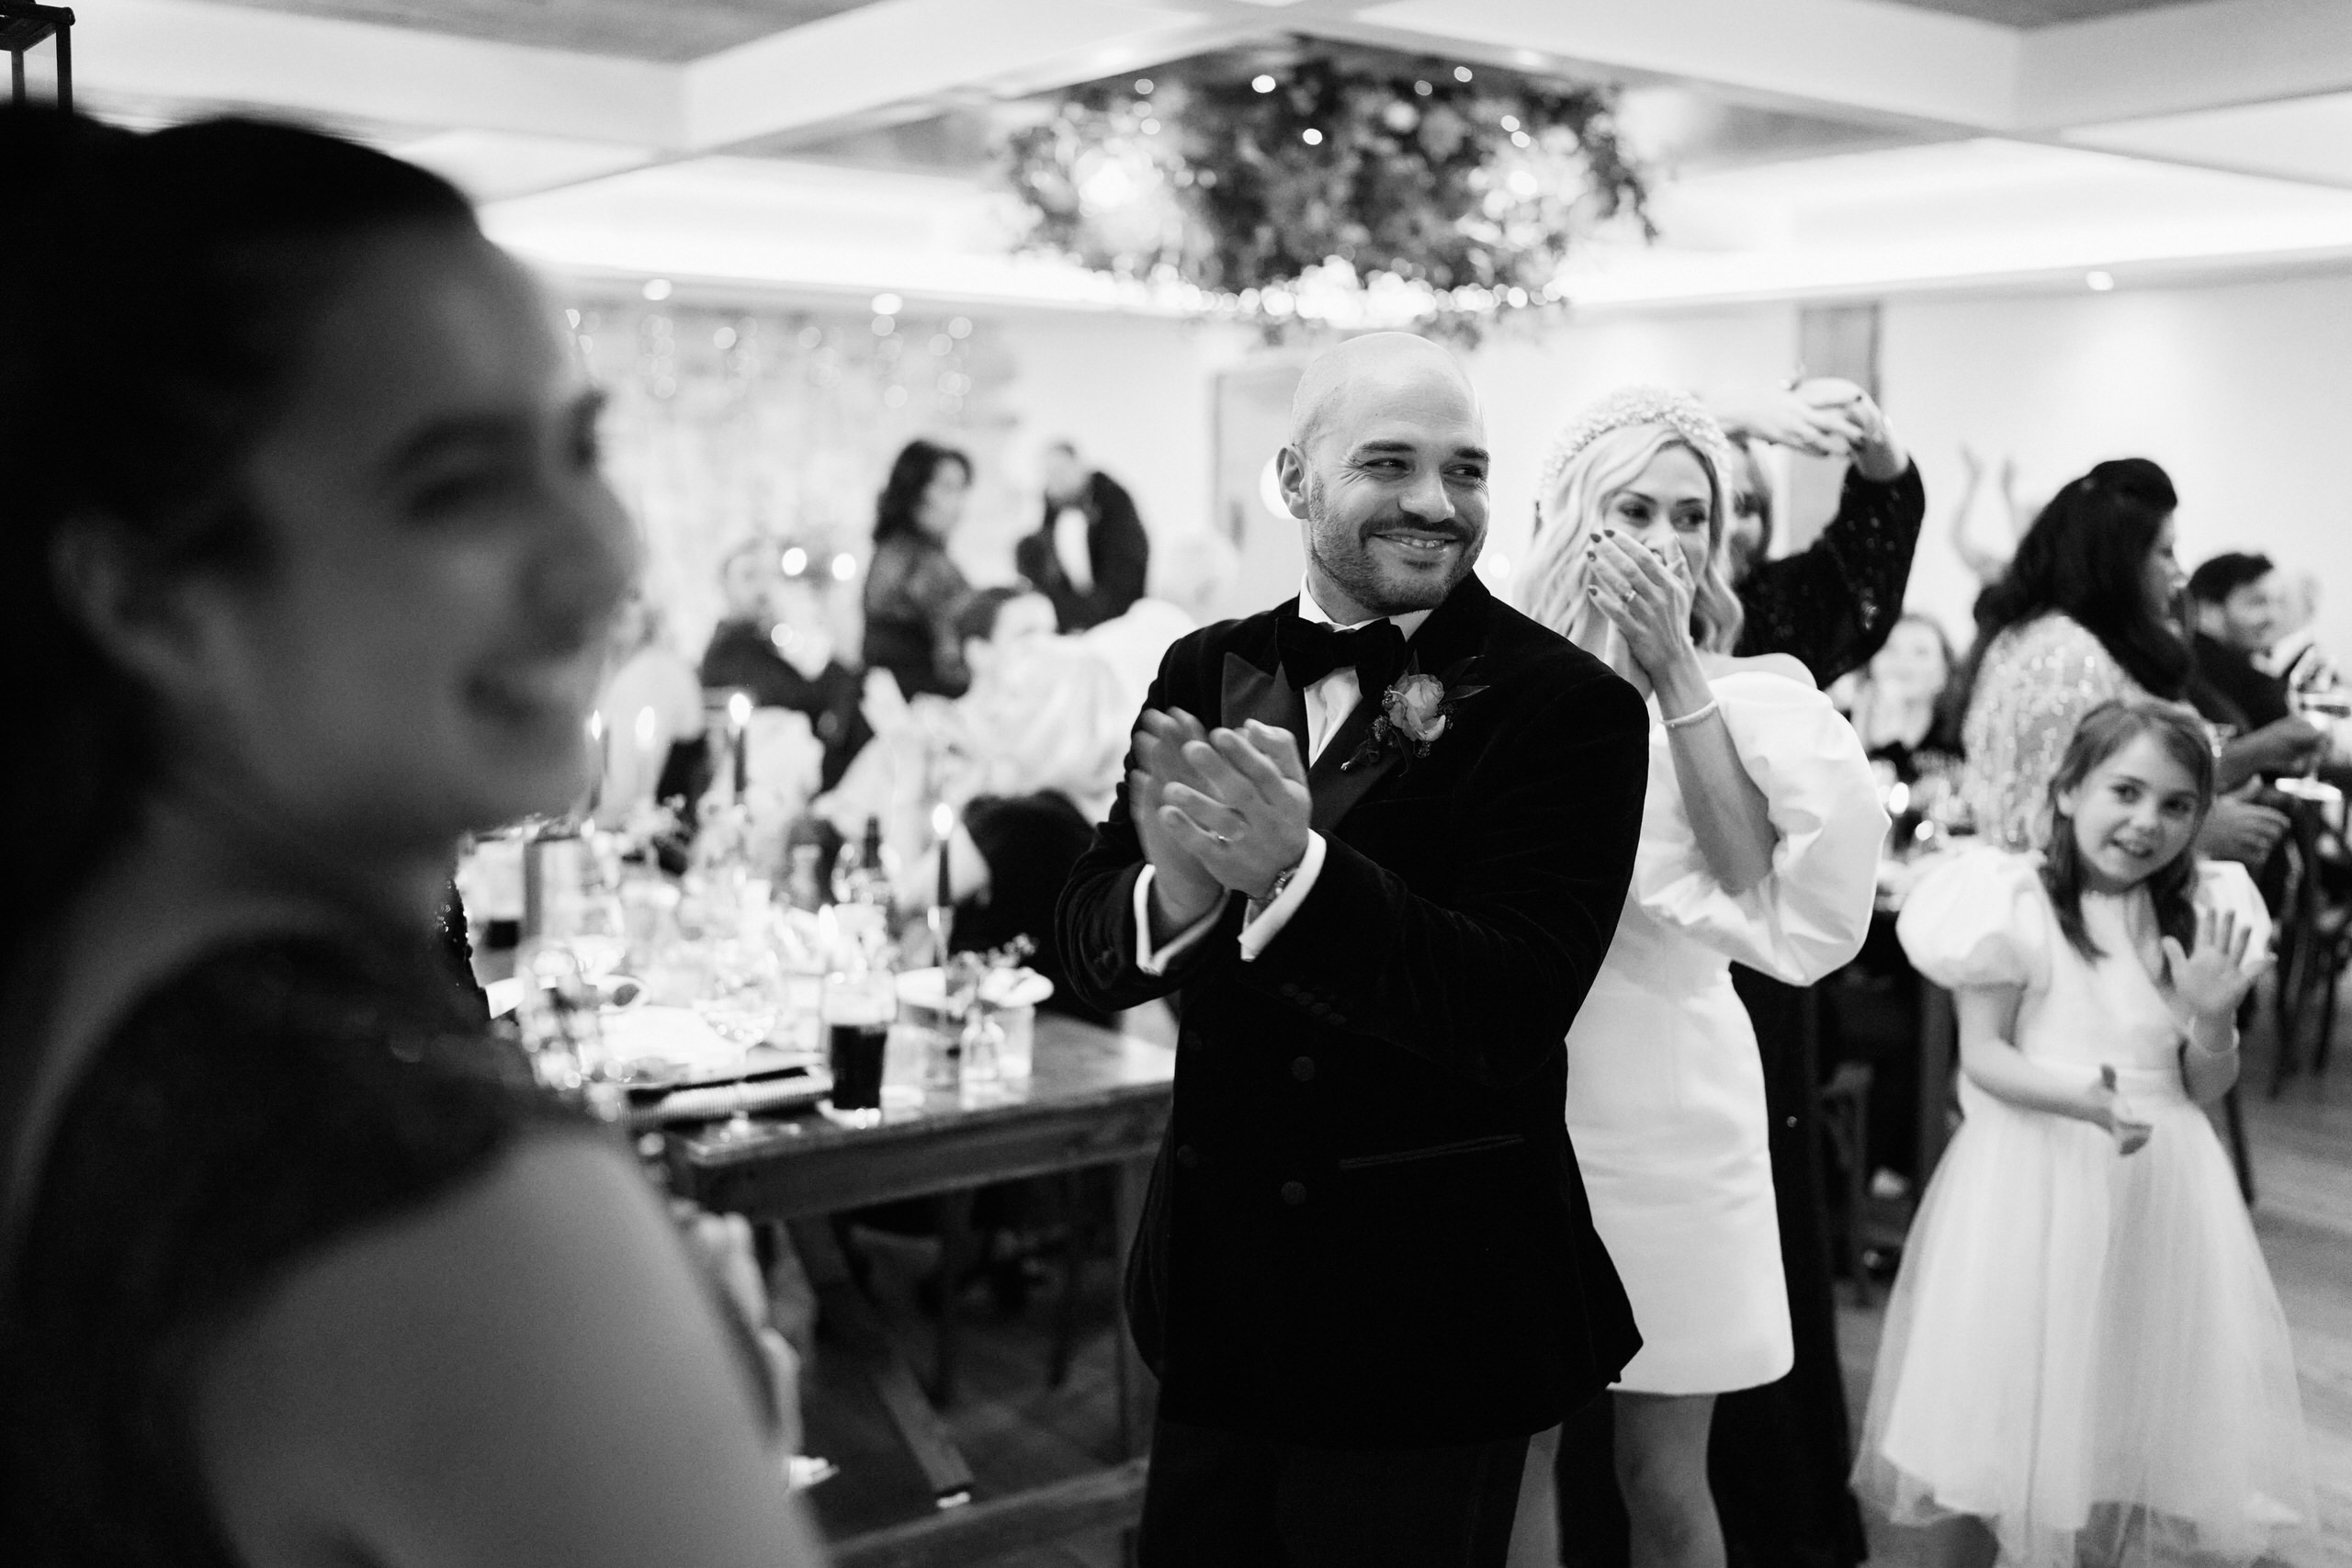 A guy applauding at a wedding party.